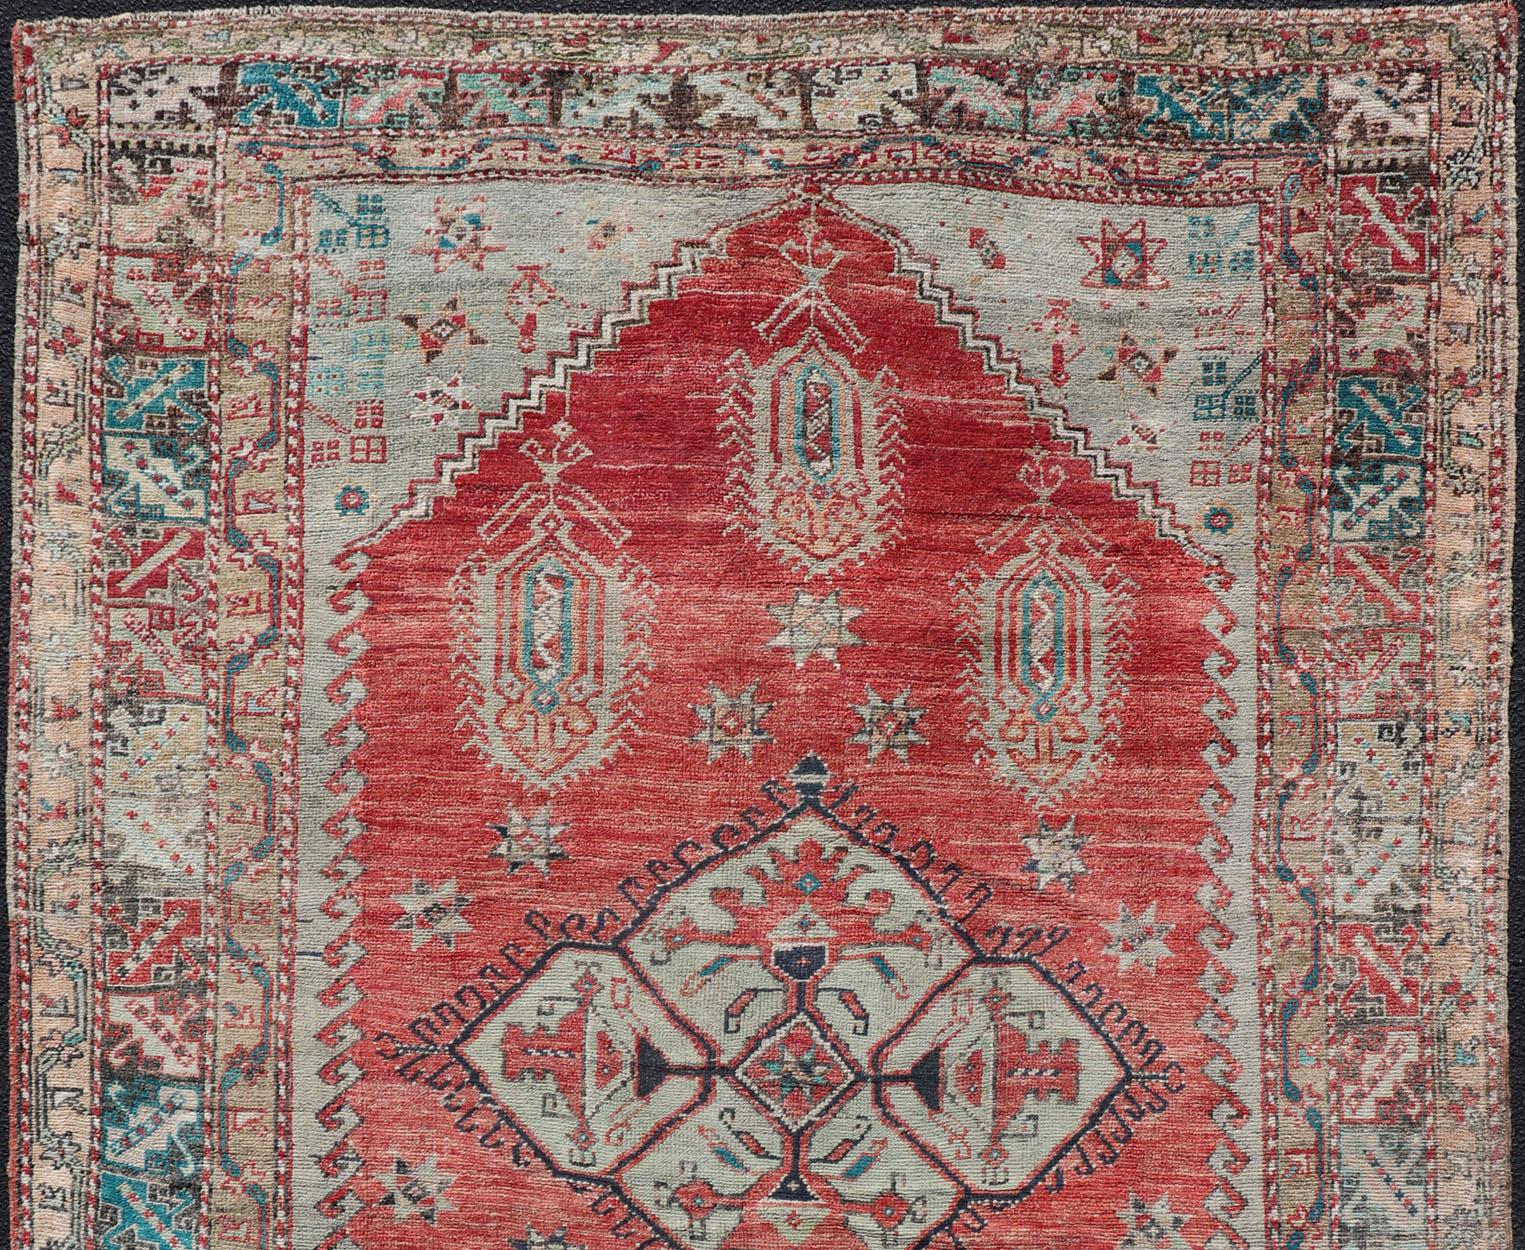 Vibrant Medallion design Turkish antique rug, rug EN-179973, country of origin / type: Turkey / Oushak, circa 1920

This antique Turkish oushak rug features a large medallion. The entirety of the piece is surrounded by a multi-tiered border of